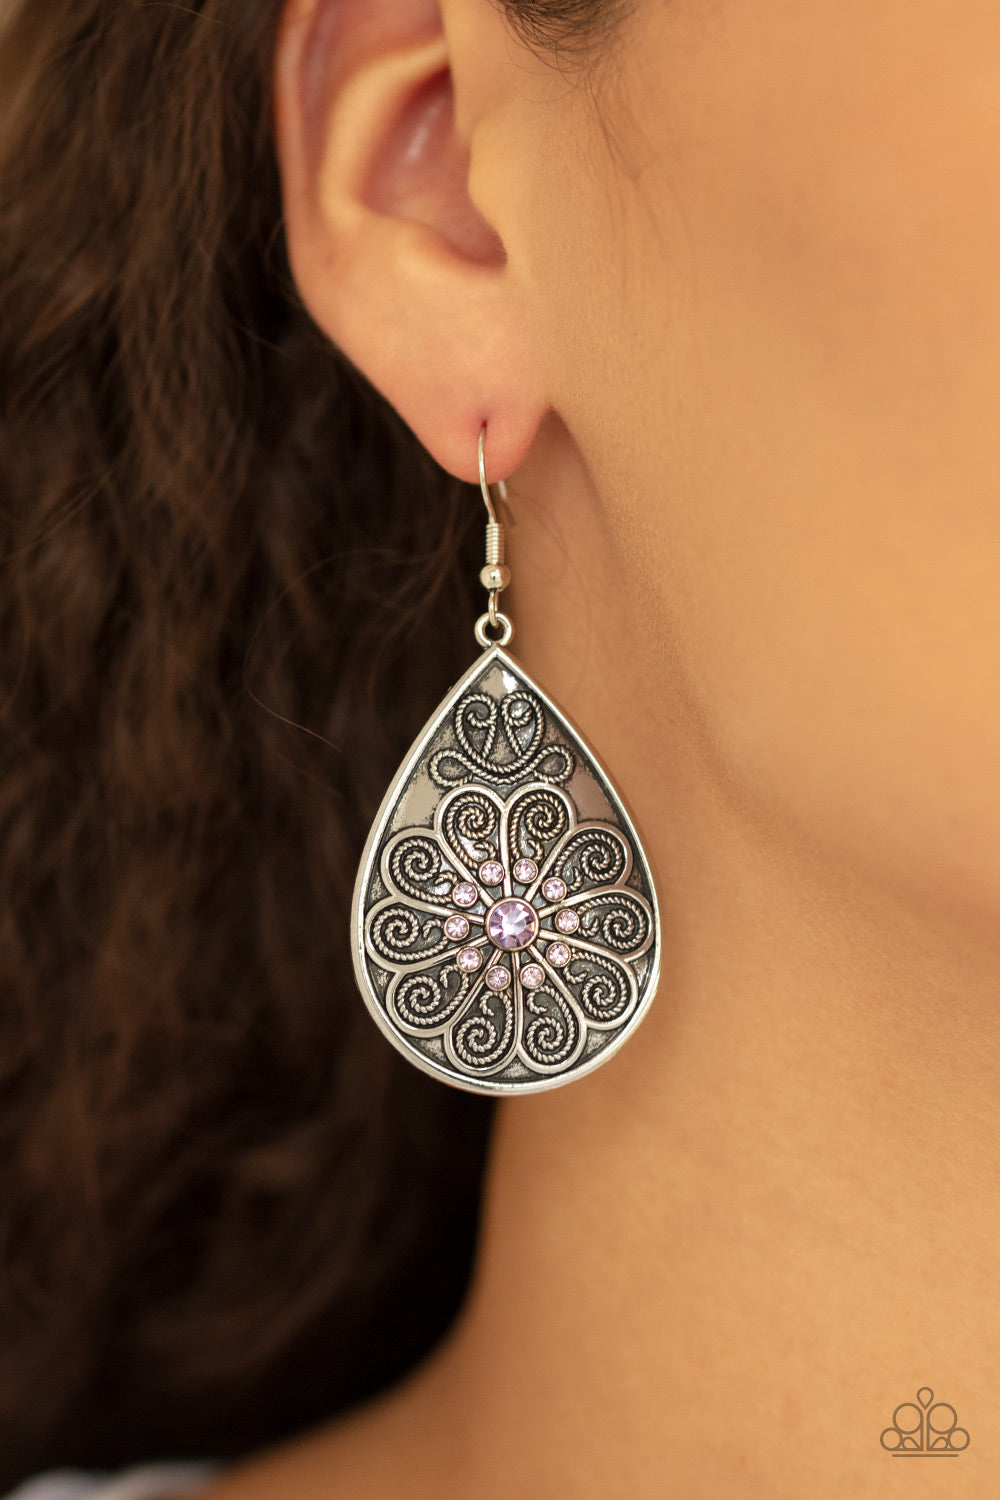 Banquet Bling - Purple Rhinestone and Silver Filigree Earrings - Paparazzi Accessories - All That Sparkles XOXO